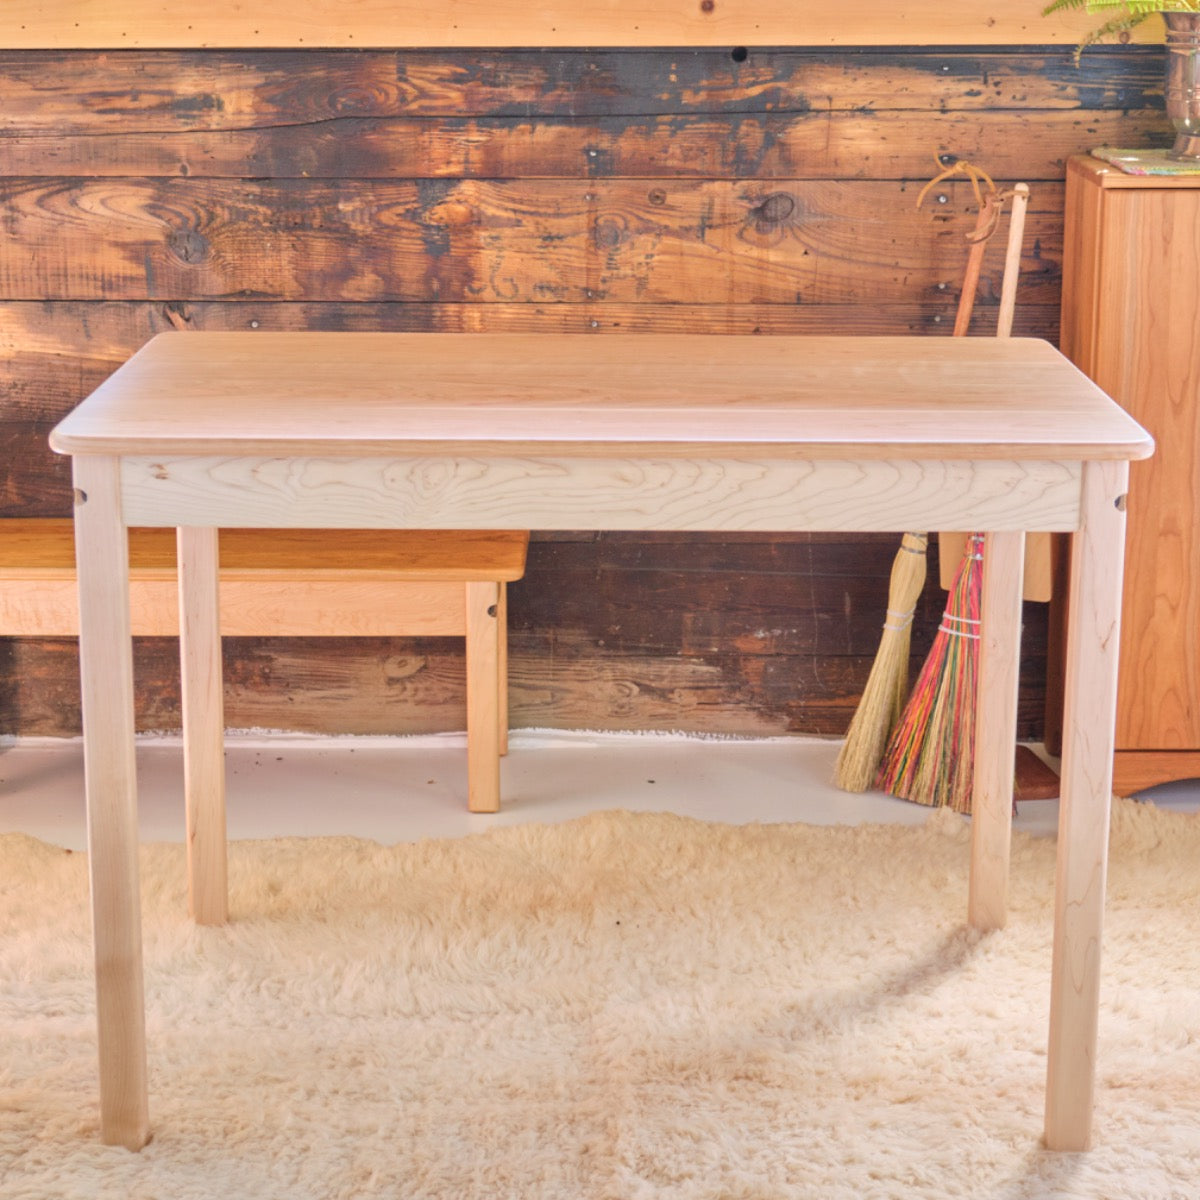 Large Simple Rectangle Table Only with Eco Water-Base Hard Finish - Child or Adult Height - 42" x 28"